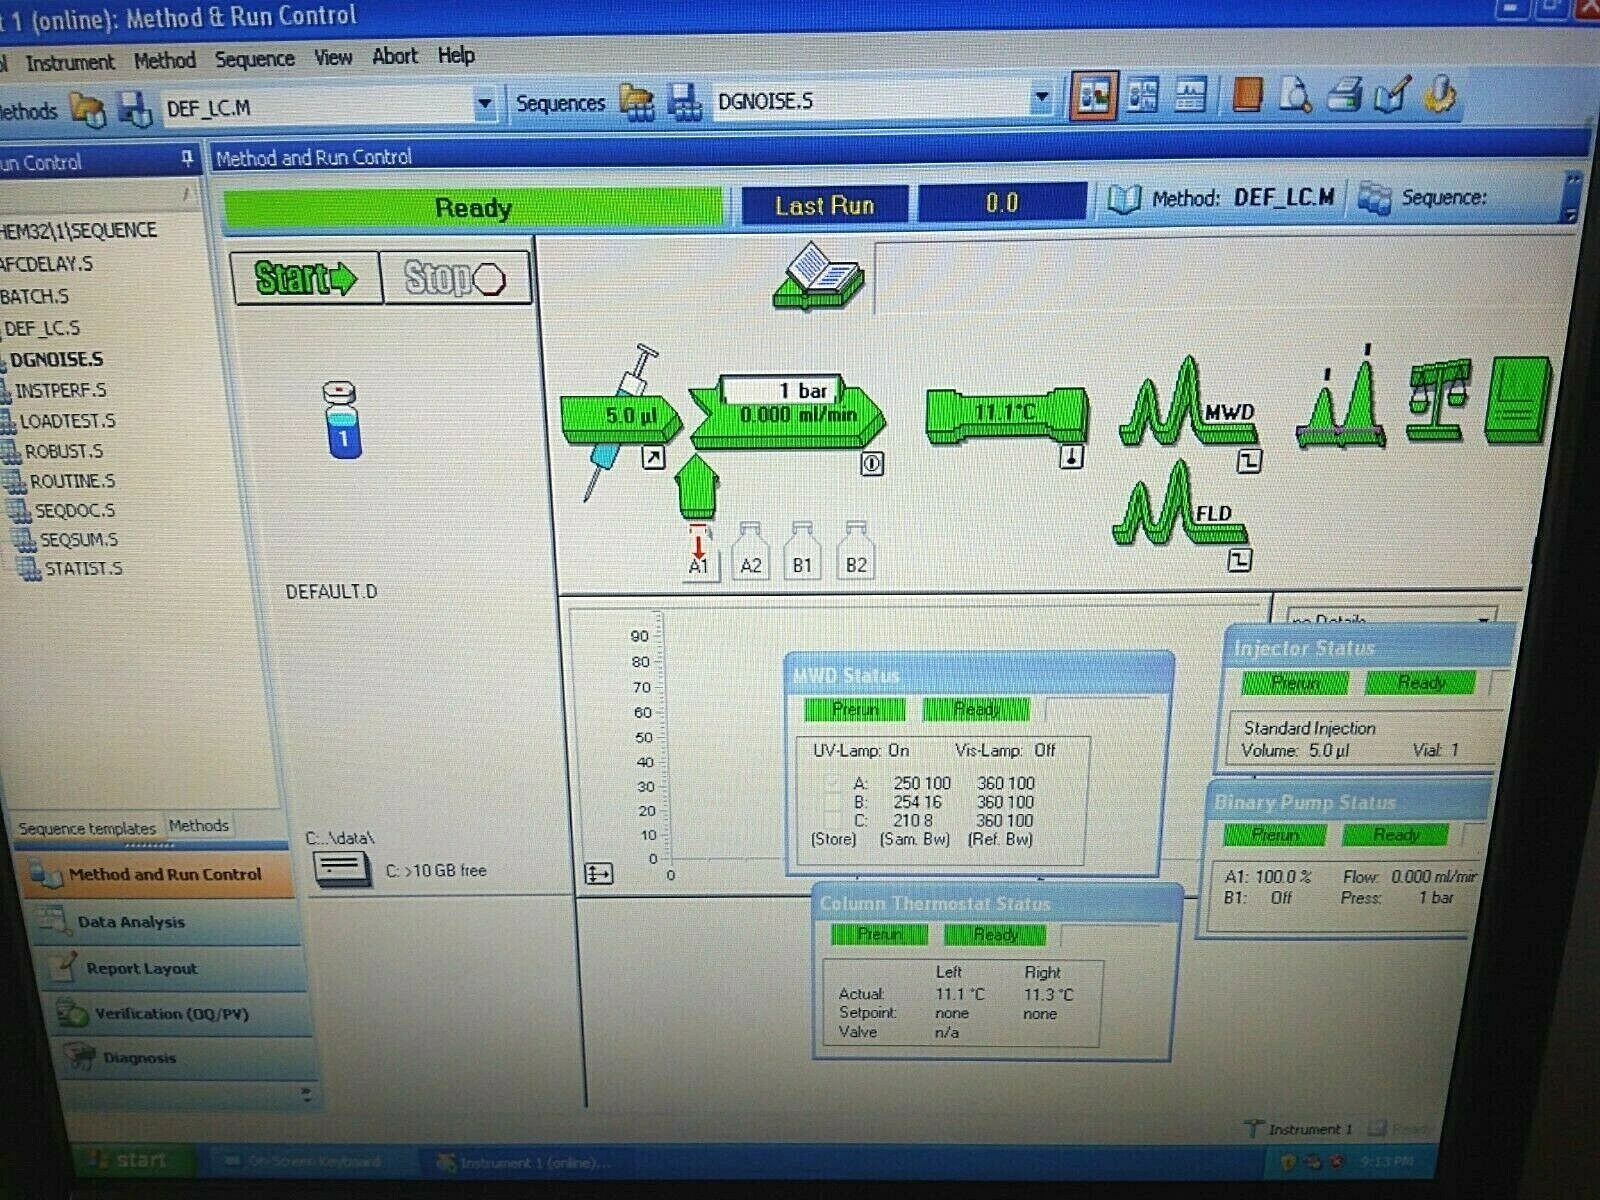 Agilent Chemstation LC B.04.03 Software